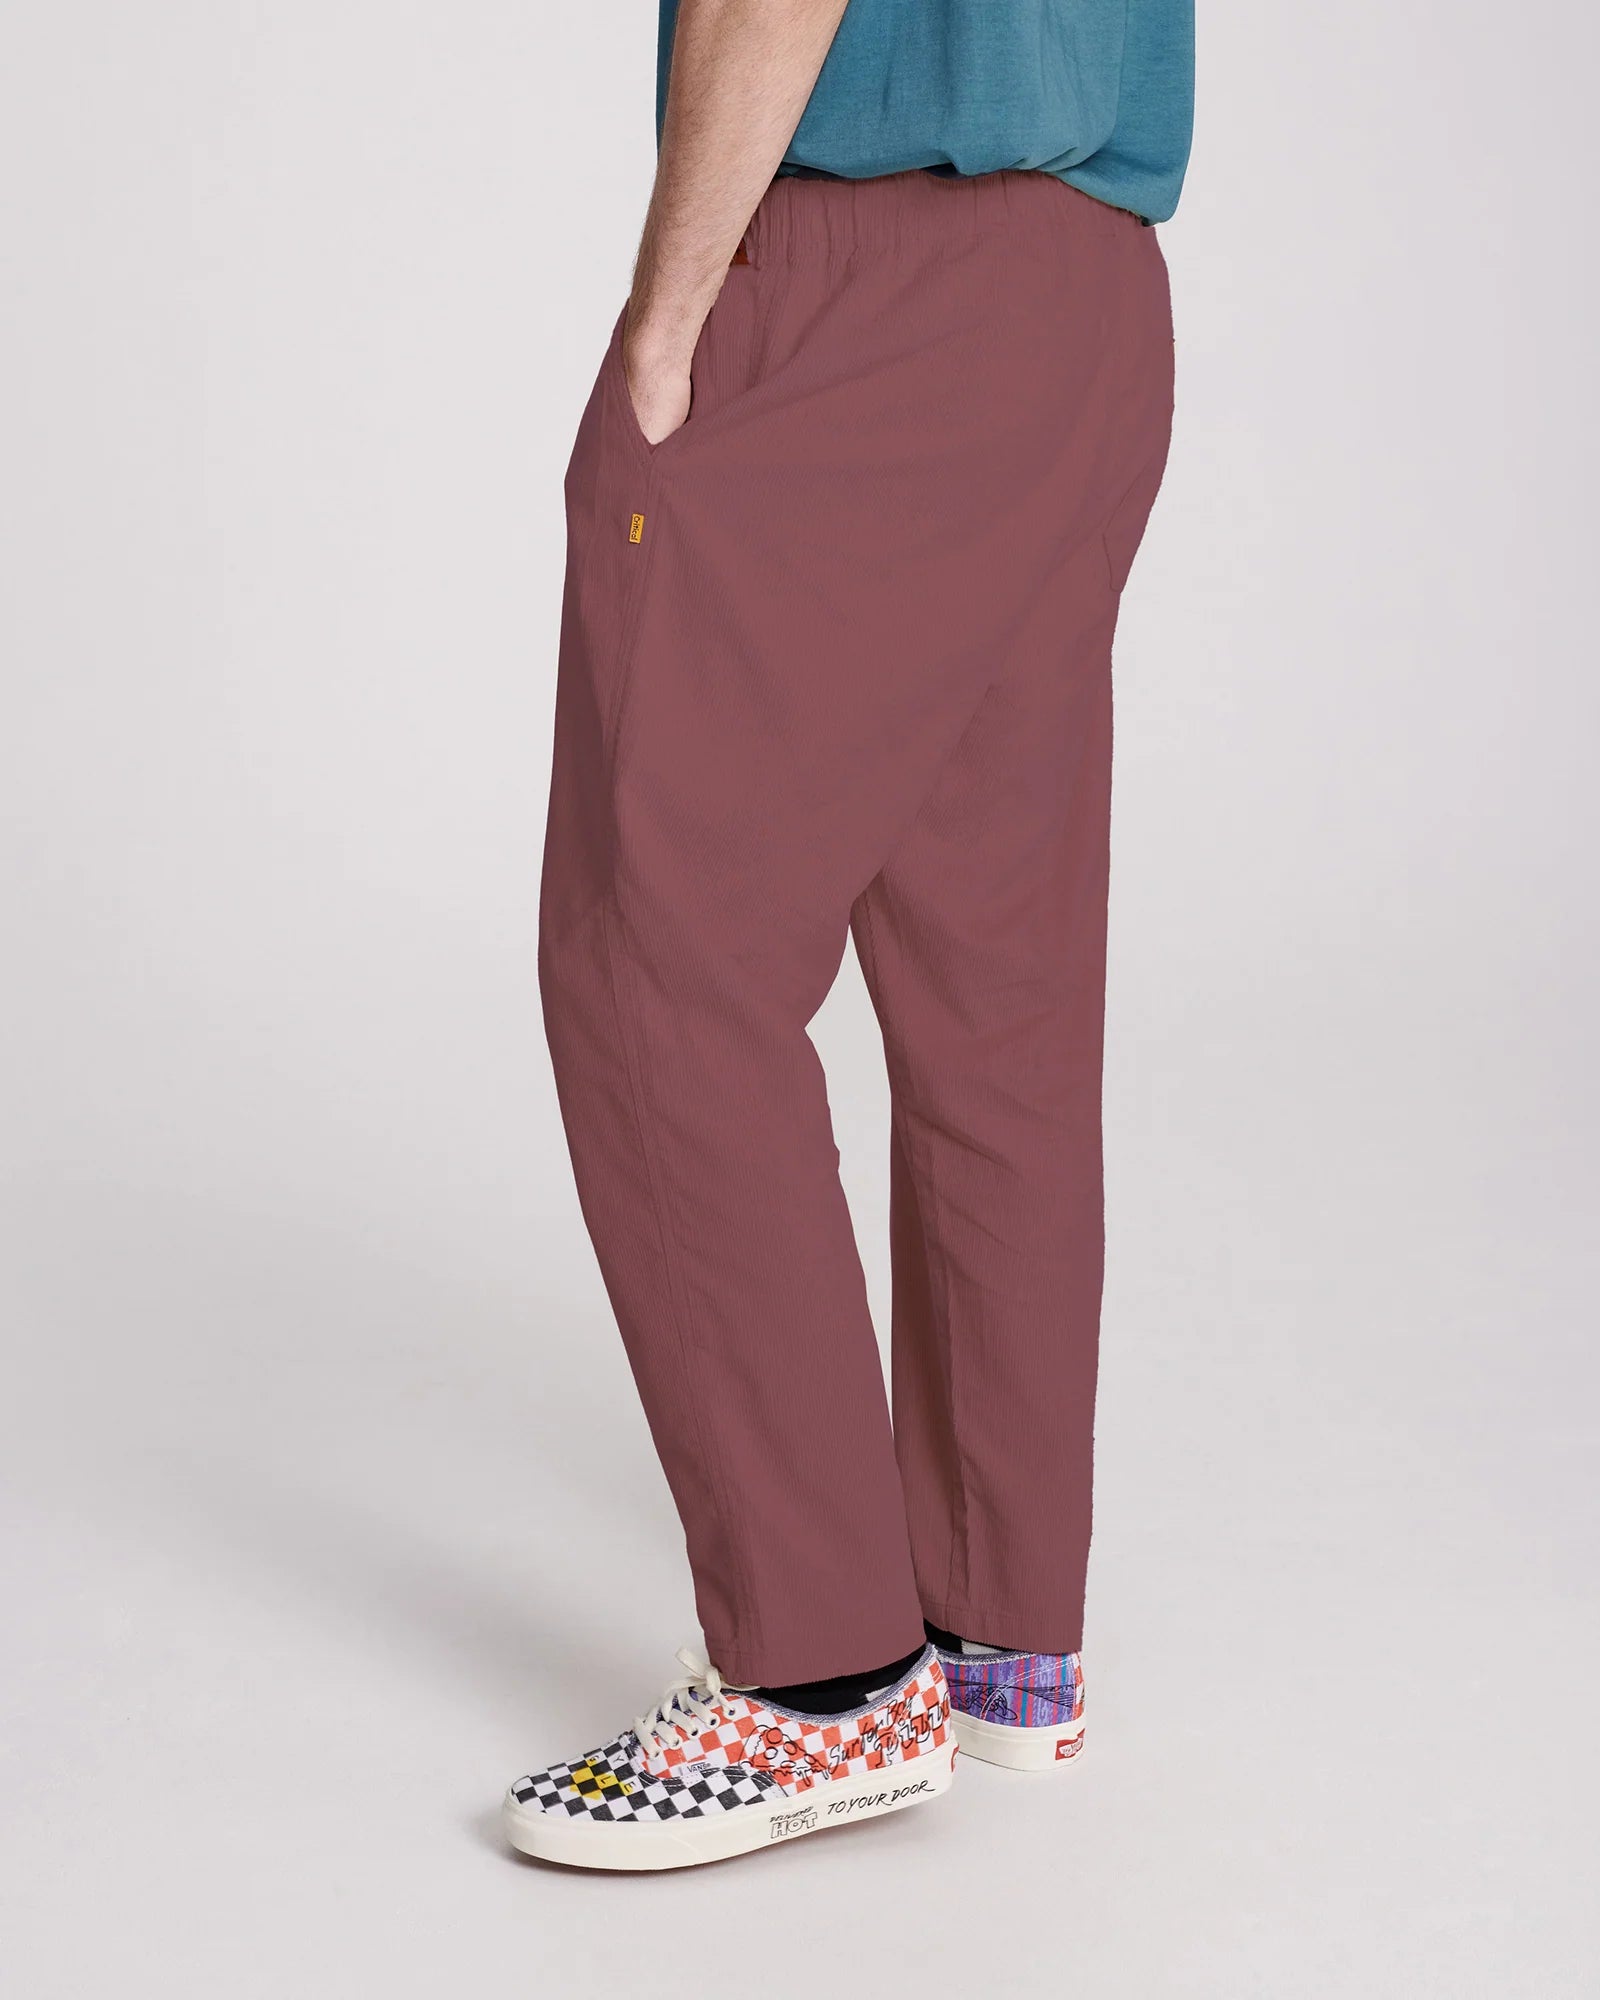 TCSS All Day Twill Pant Plum